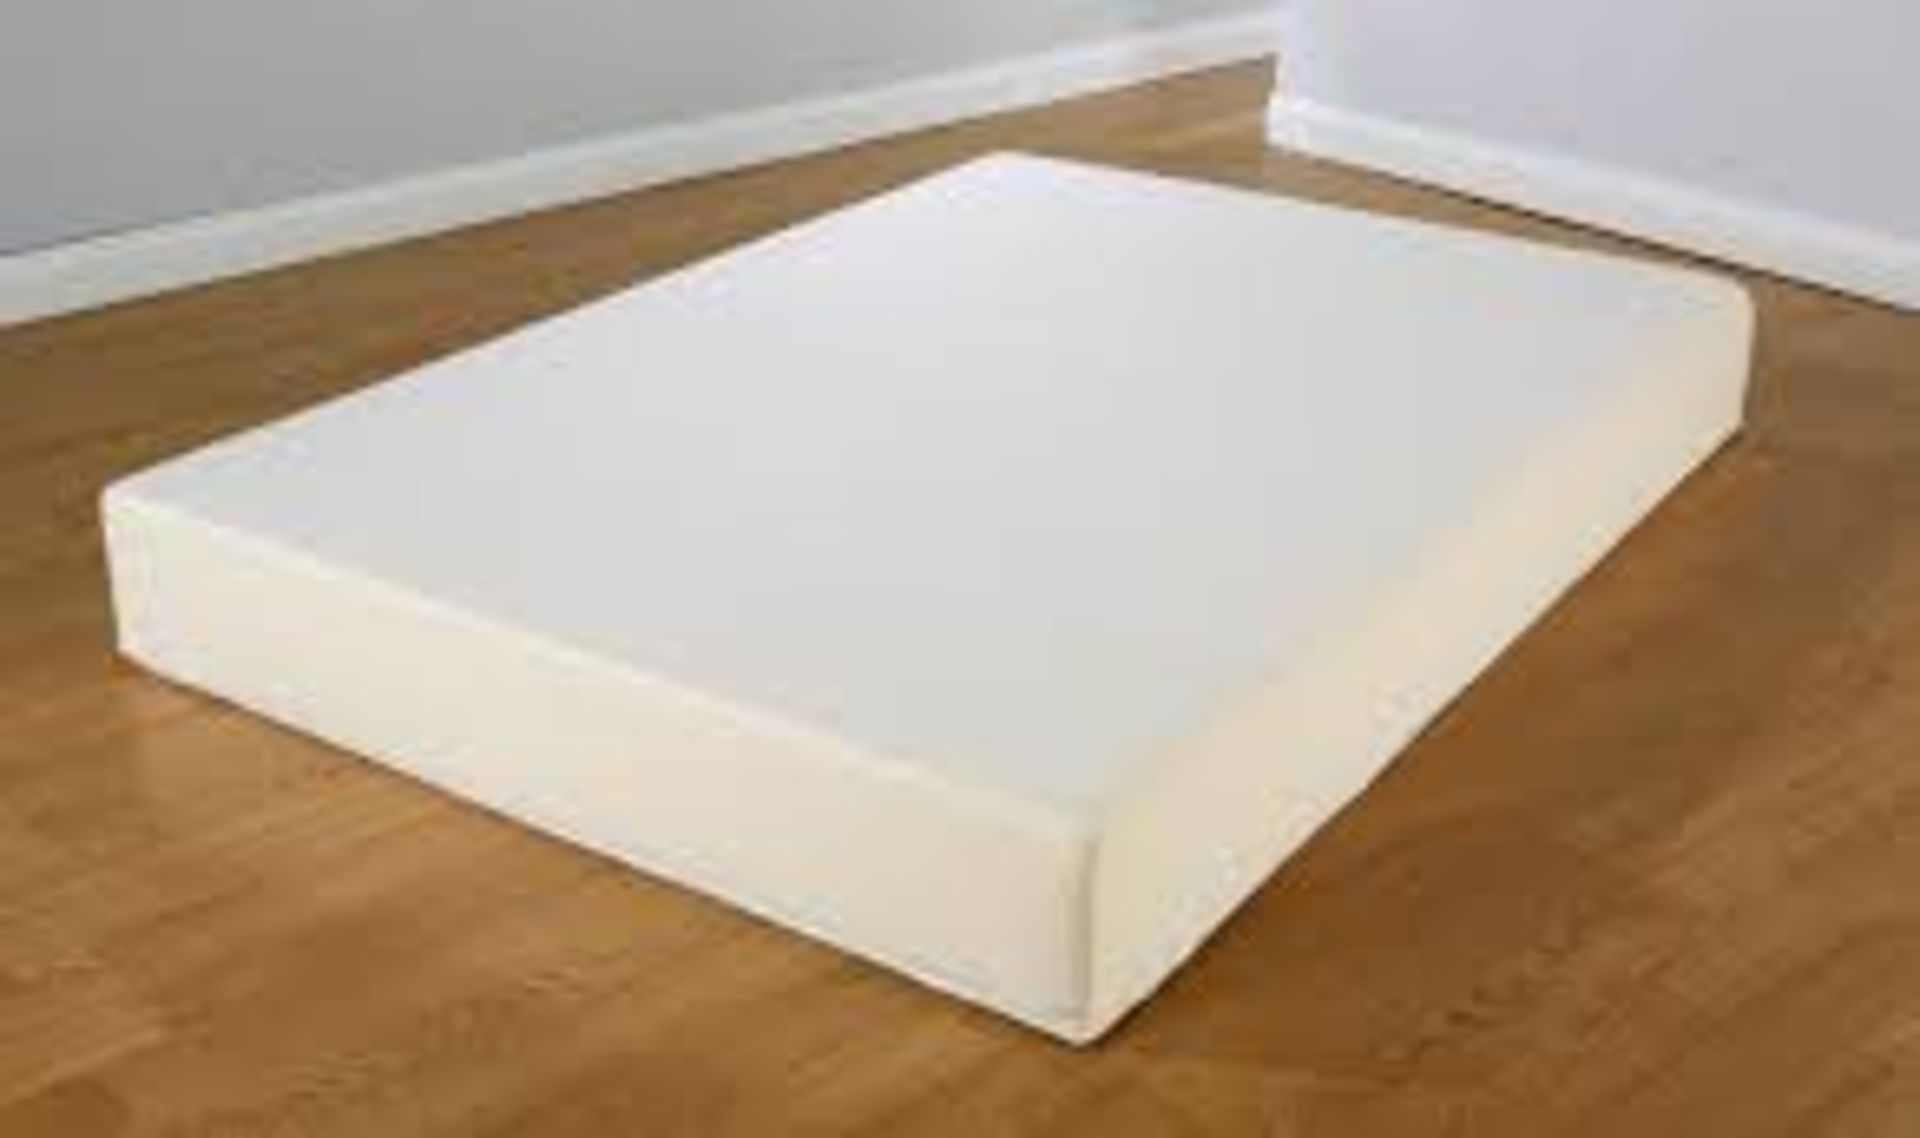 1 BRAND NEW BAGGED, ROLLED AND BOXED CASPIAN 3FT SINGLE MEMORY FOAM MATTRESS 11CM THICKNESS